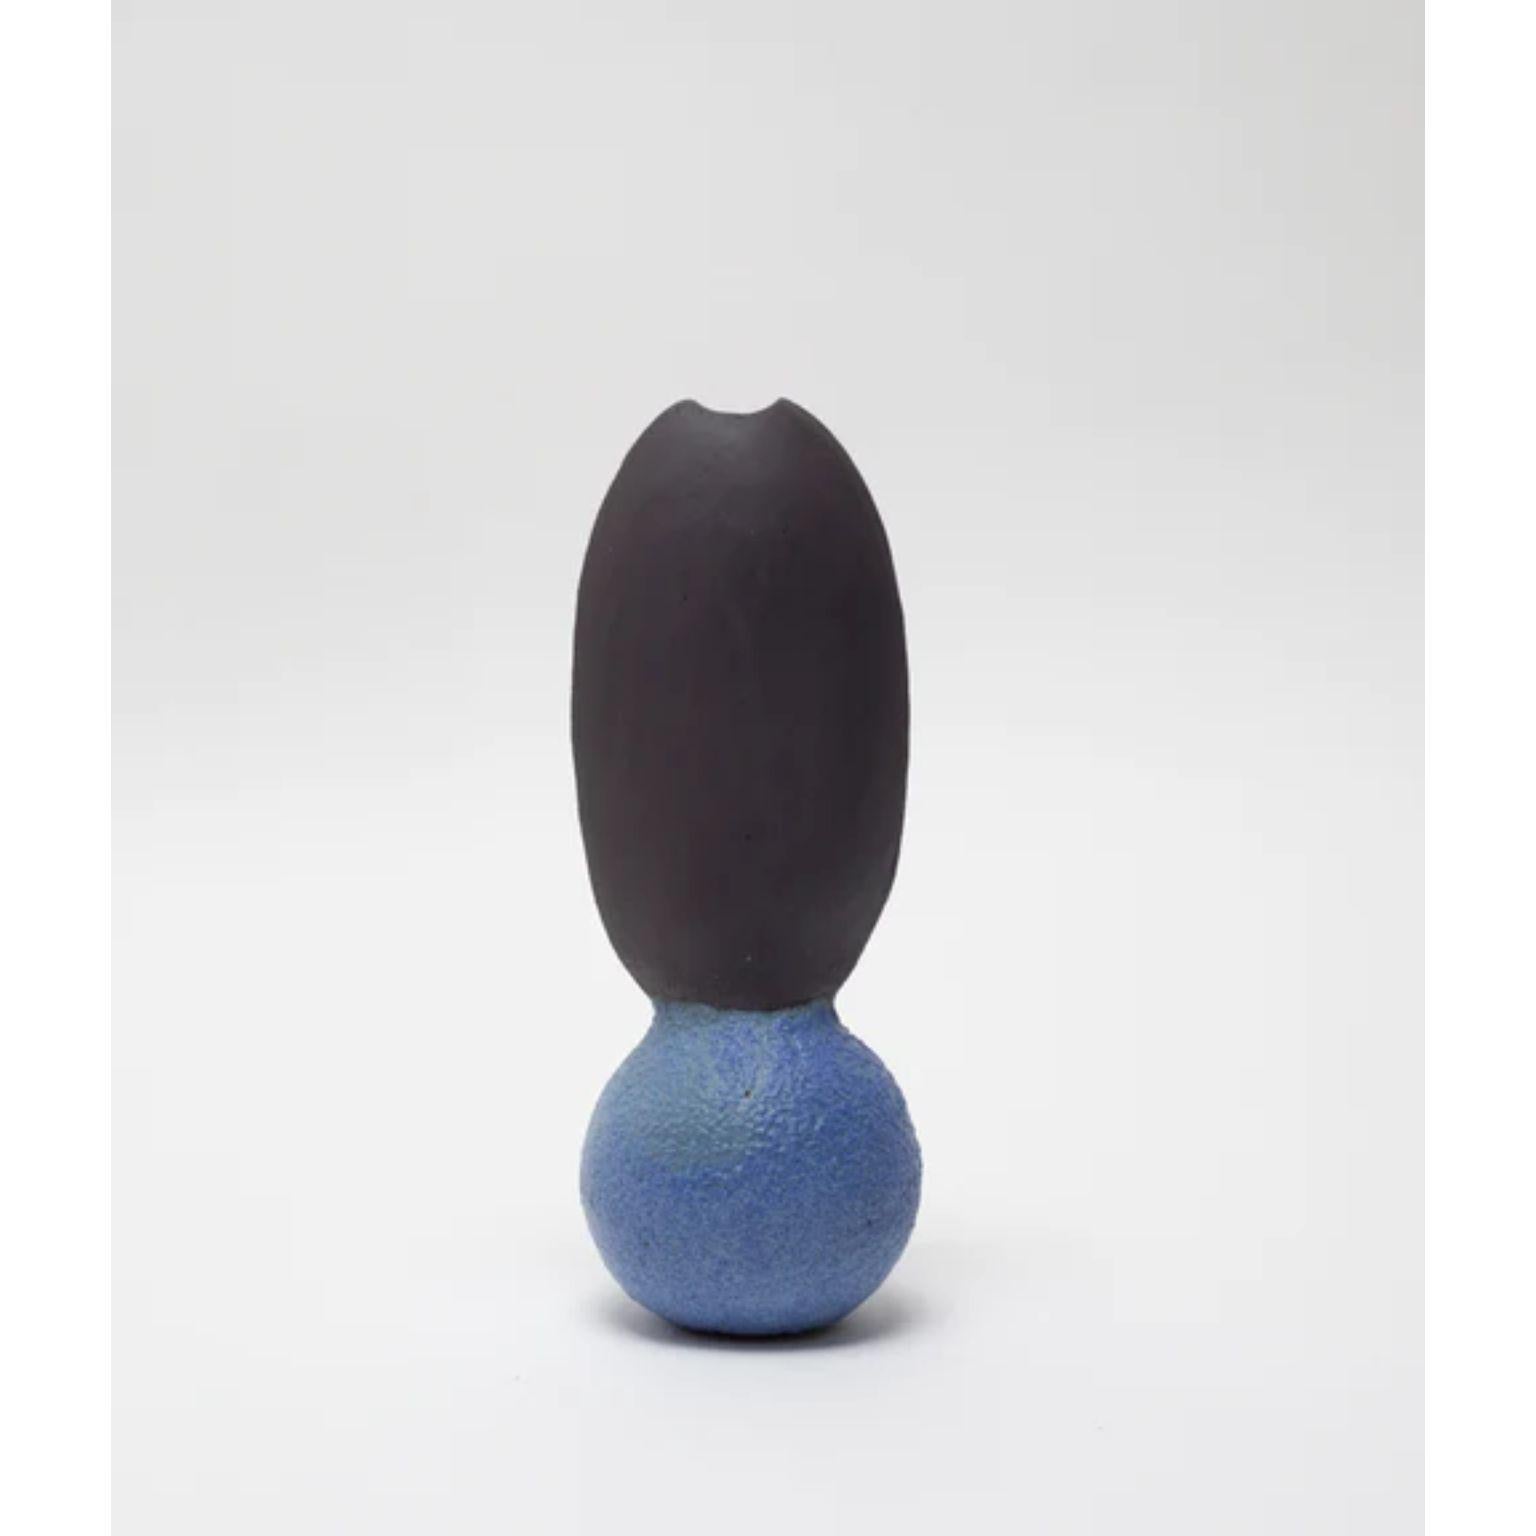 Itera Black And Blue Single Vase by Ia Kutateladze
One Of  A Kind.
Dimensions: D 10 x W 10 x H 27 cm.
Materials: Black and blue clay.

Handcrafted sculptural ceramic vase in black. Please note coloration may vary. Each piece is one of a kind, due to